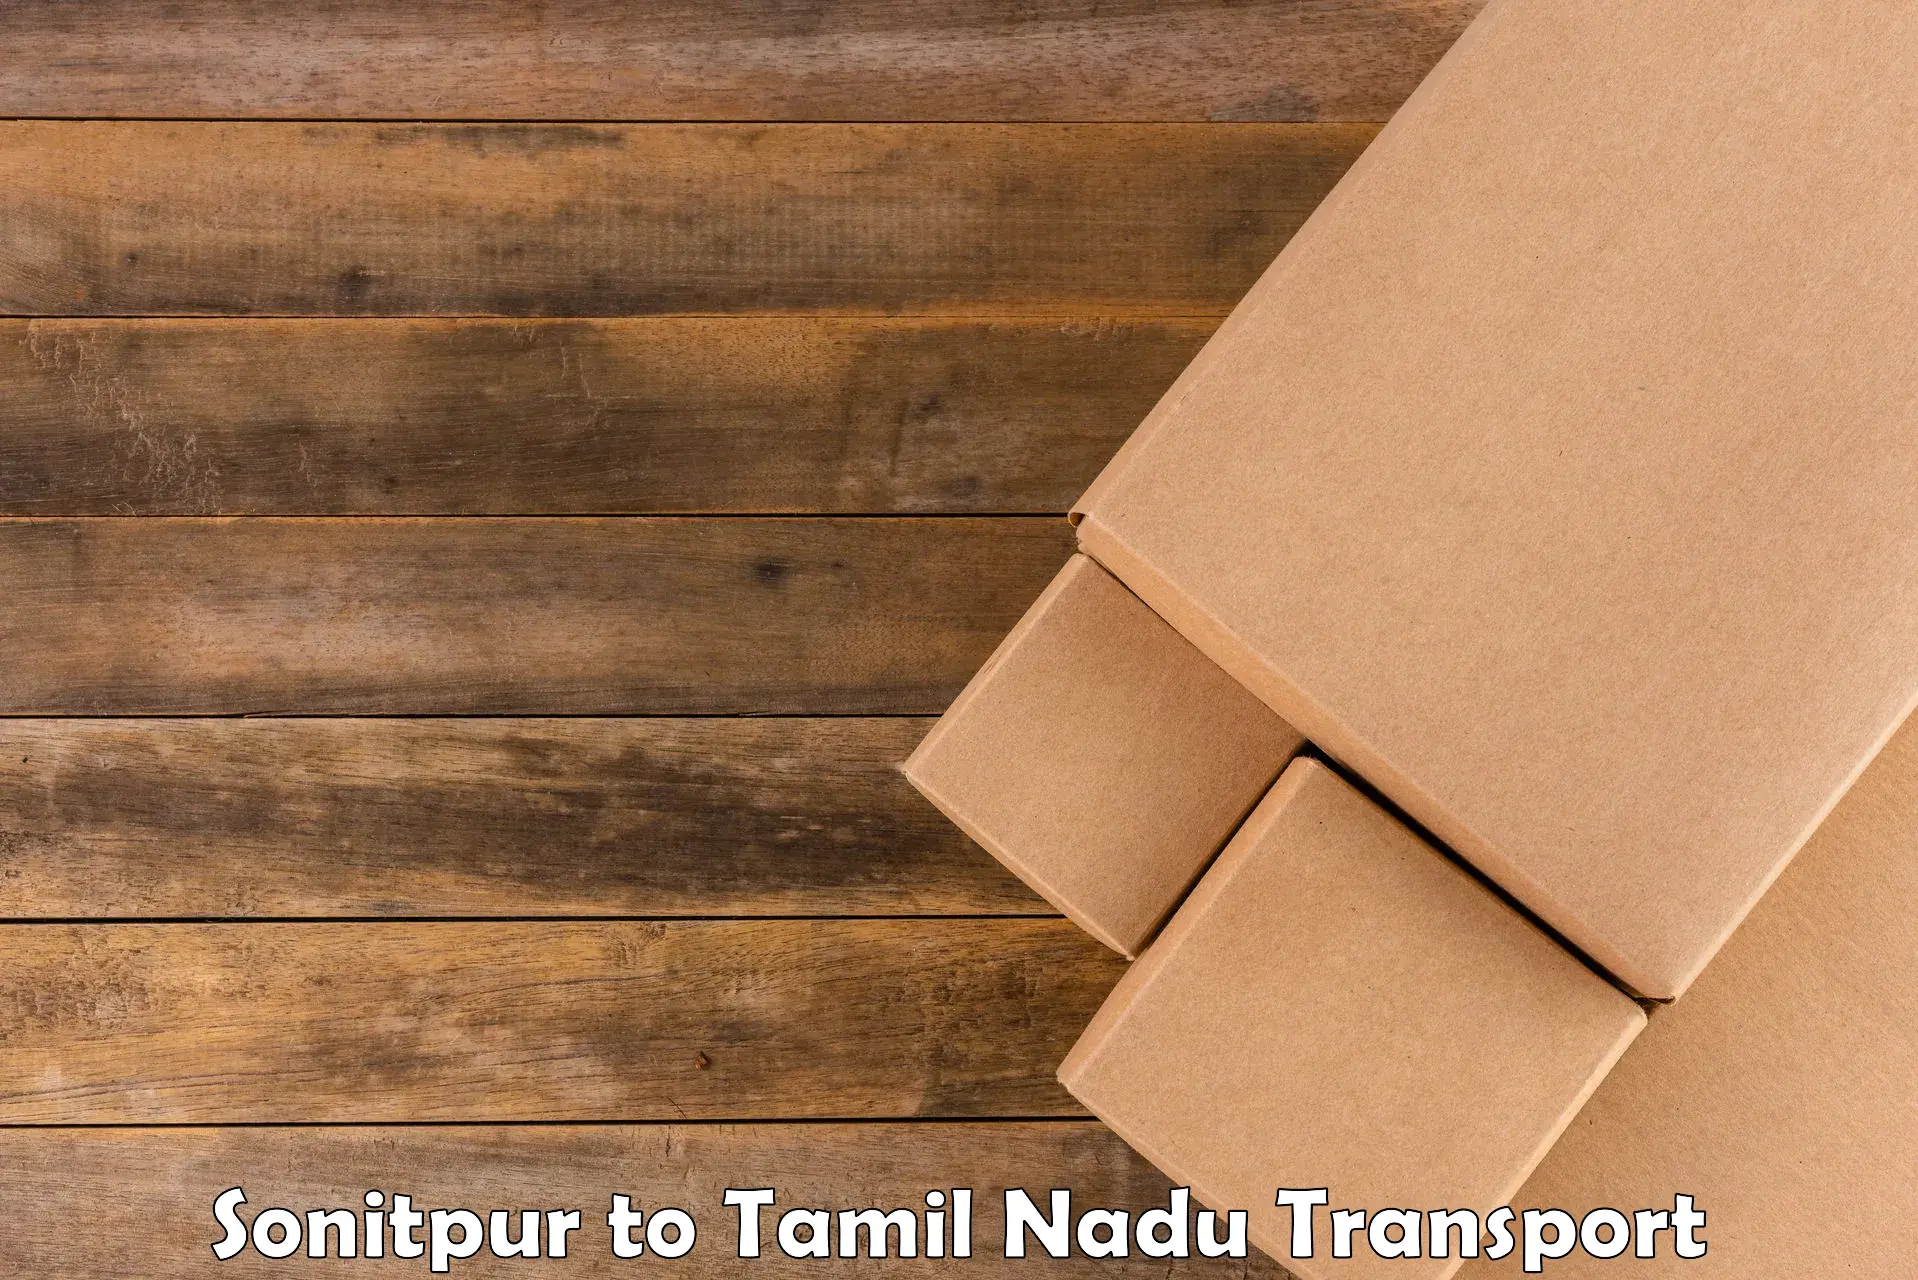 Online transport service Sonitpur to Mylapore